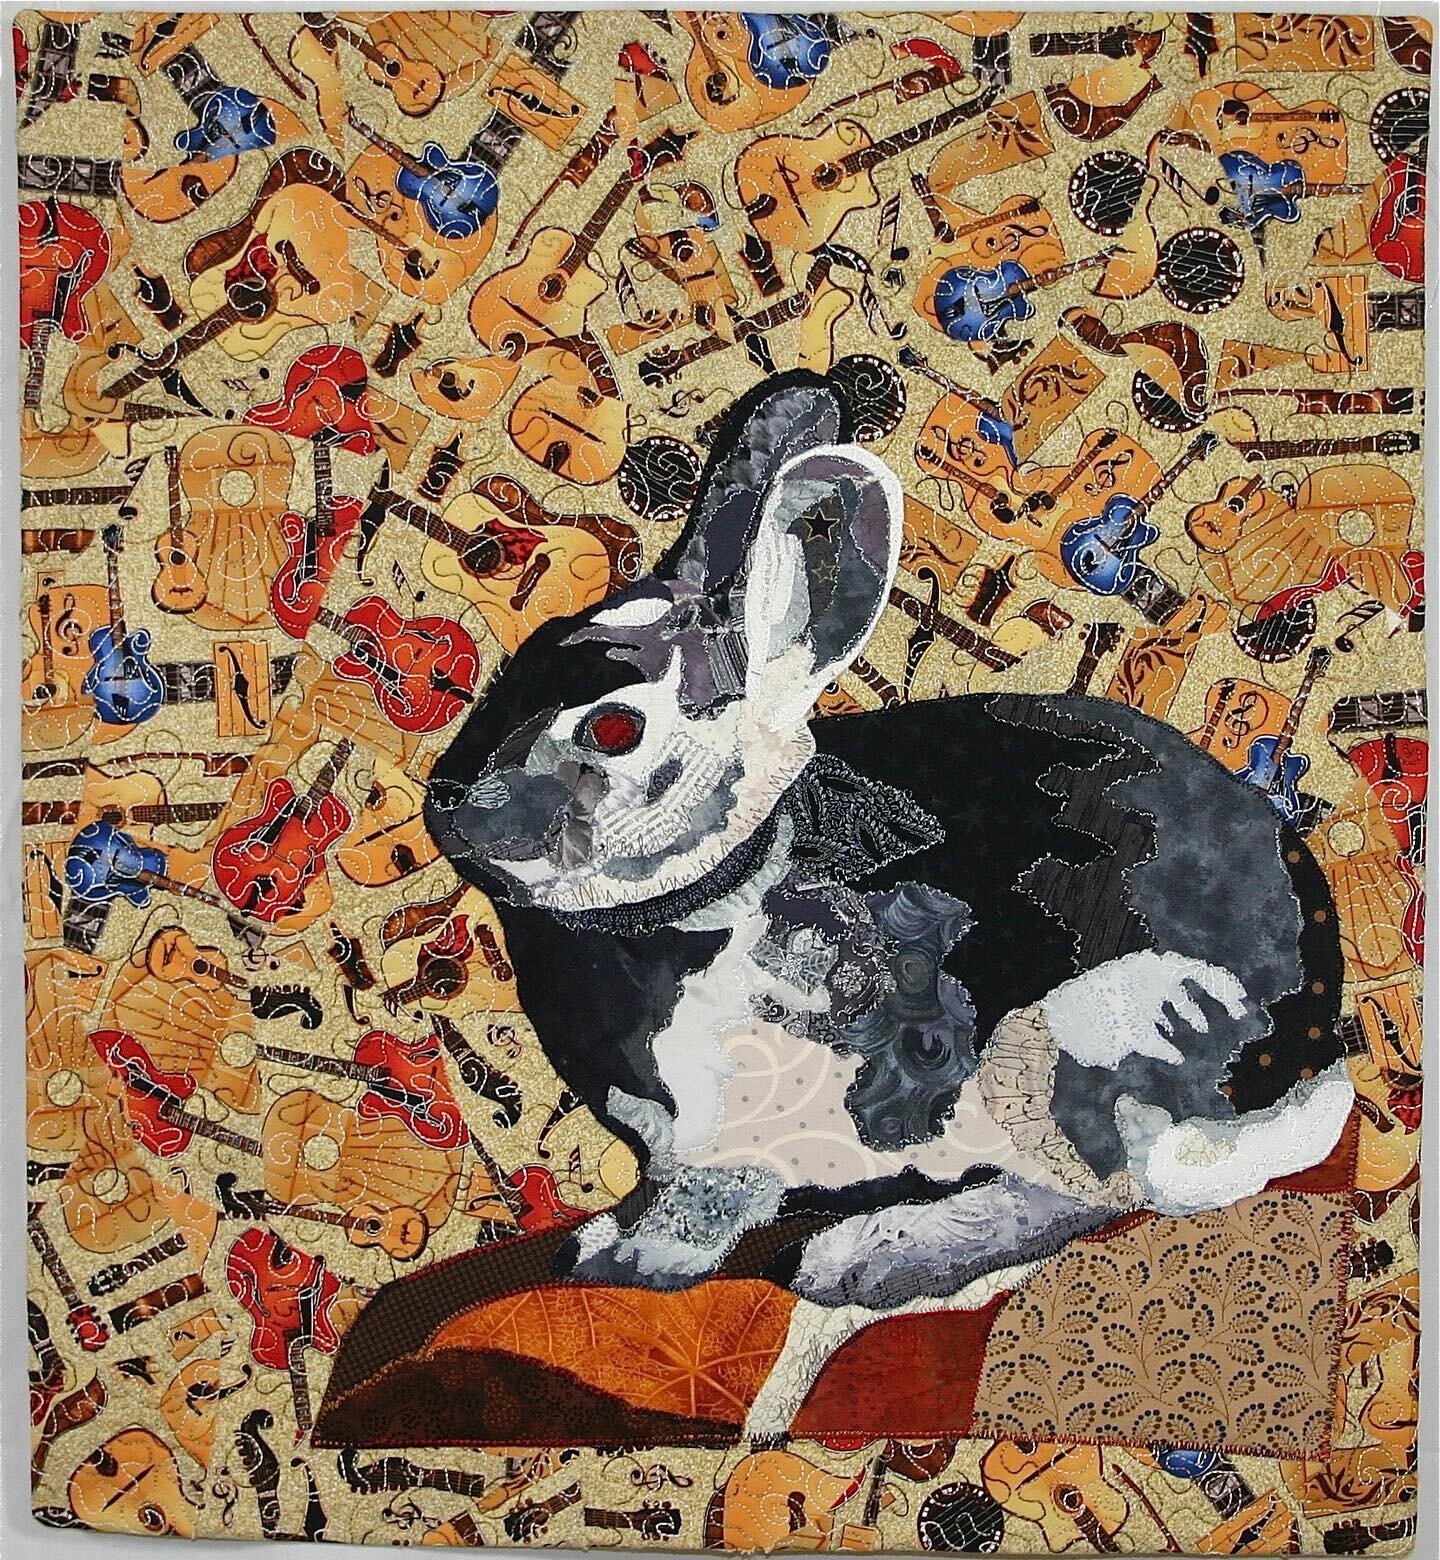 Thinking of what&rsquo;s next. Ideas are swirling but not ready to put the needle down and &ldquo;Hear the Music&rdquo;
#artquilt #rabbitlove #rabbitart